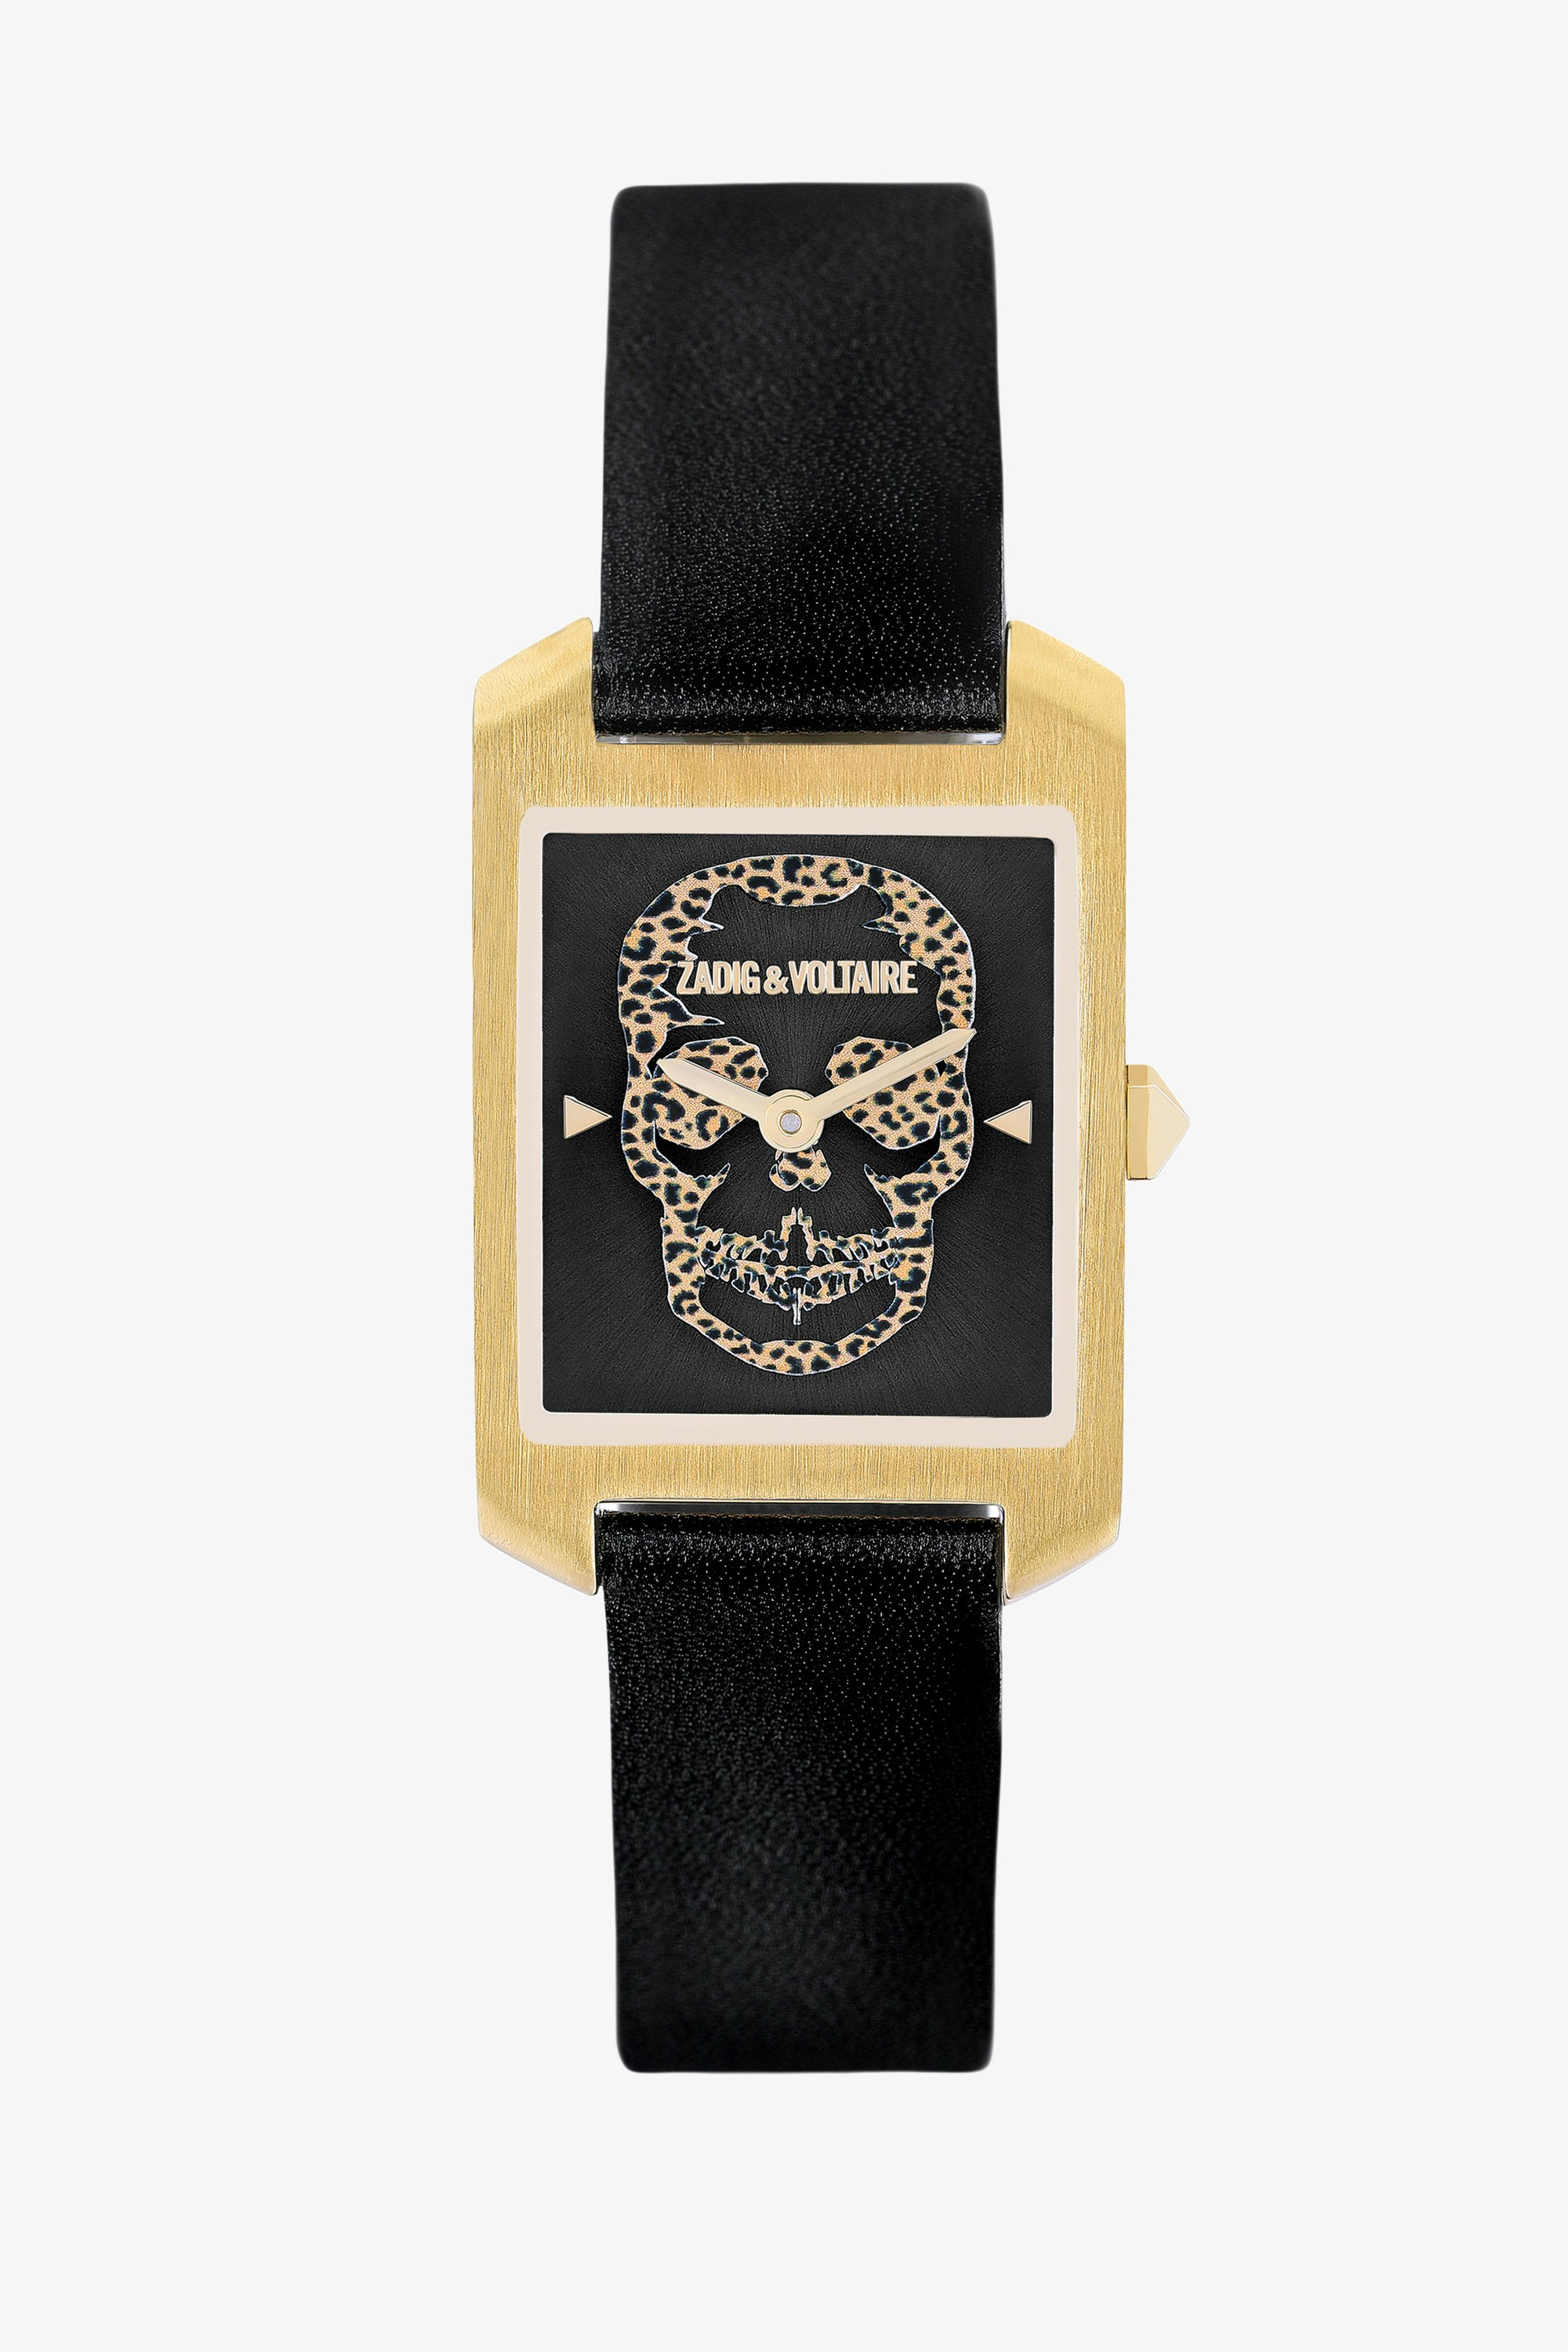 Dial Leo Timeline ウォッチ Women’s gold-tone watch with rectangular dial featuring a leopard-print skull and black leather strap